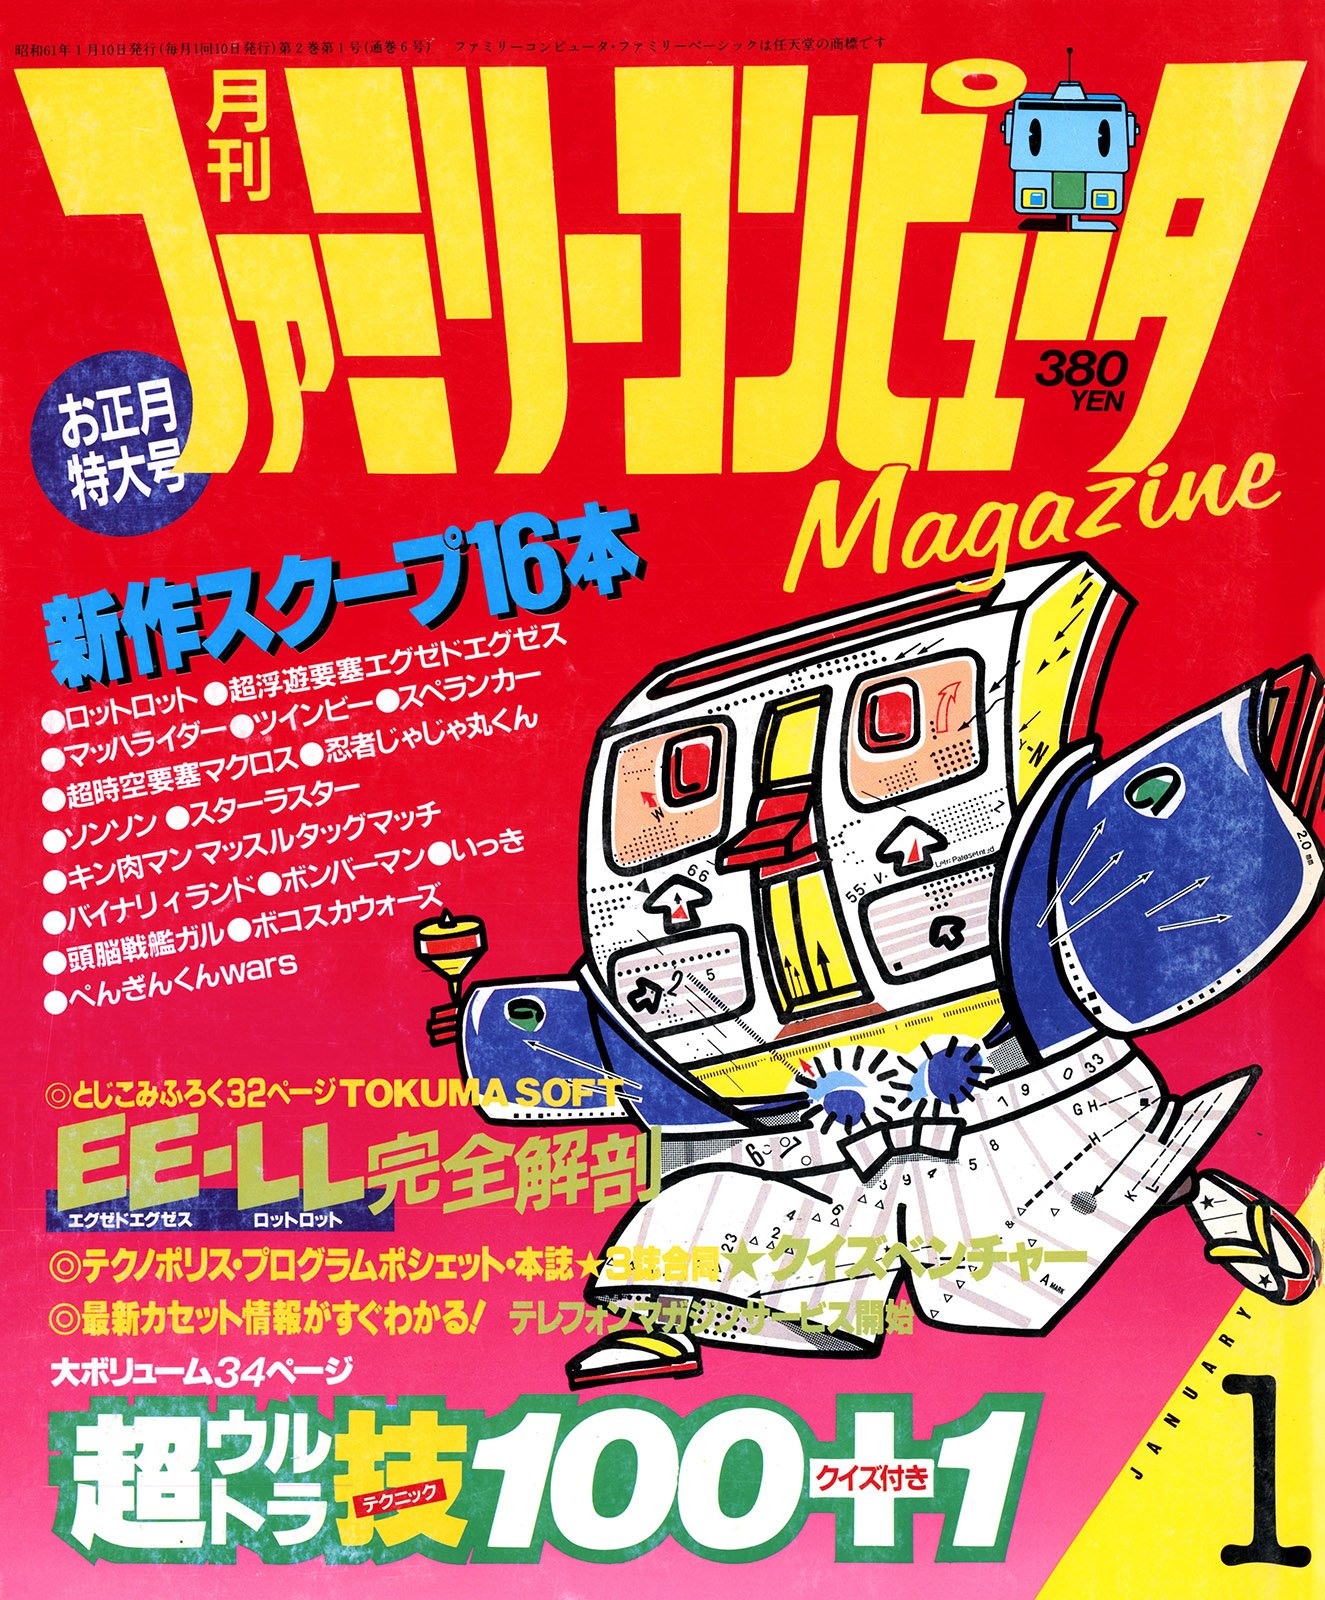 More information about "Family Computer Magazine Issue 006 (January 1986)"